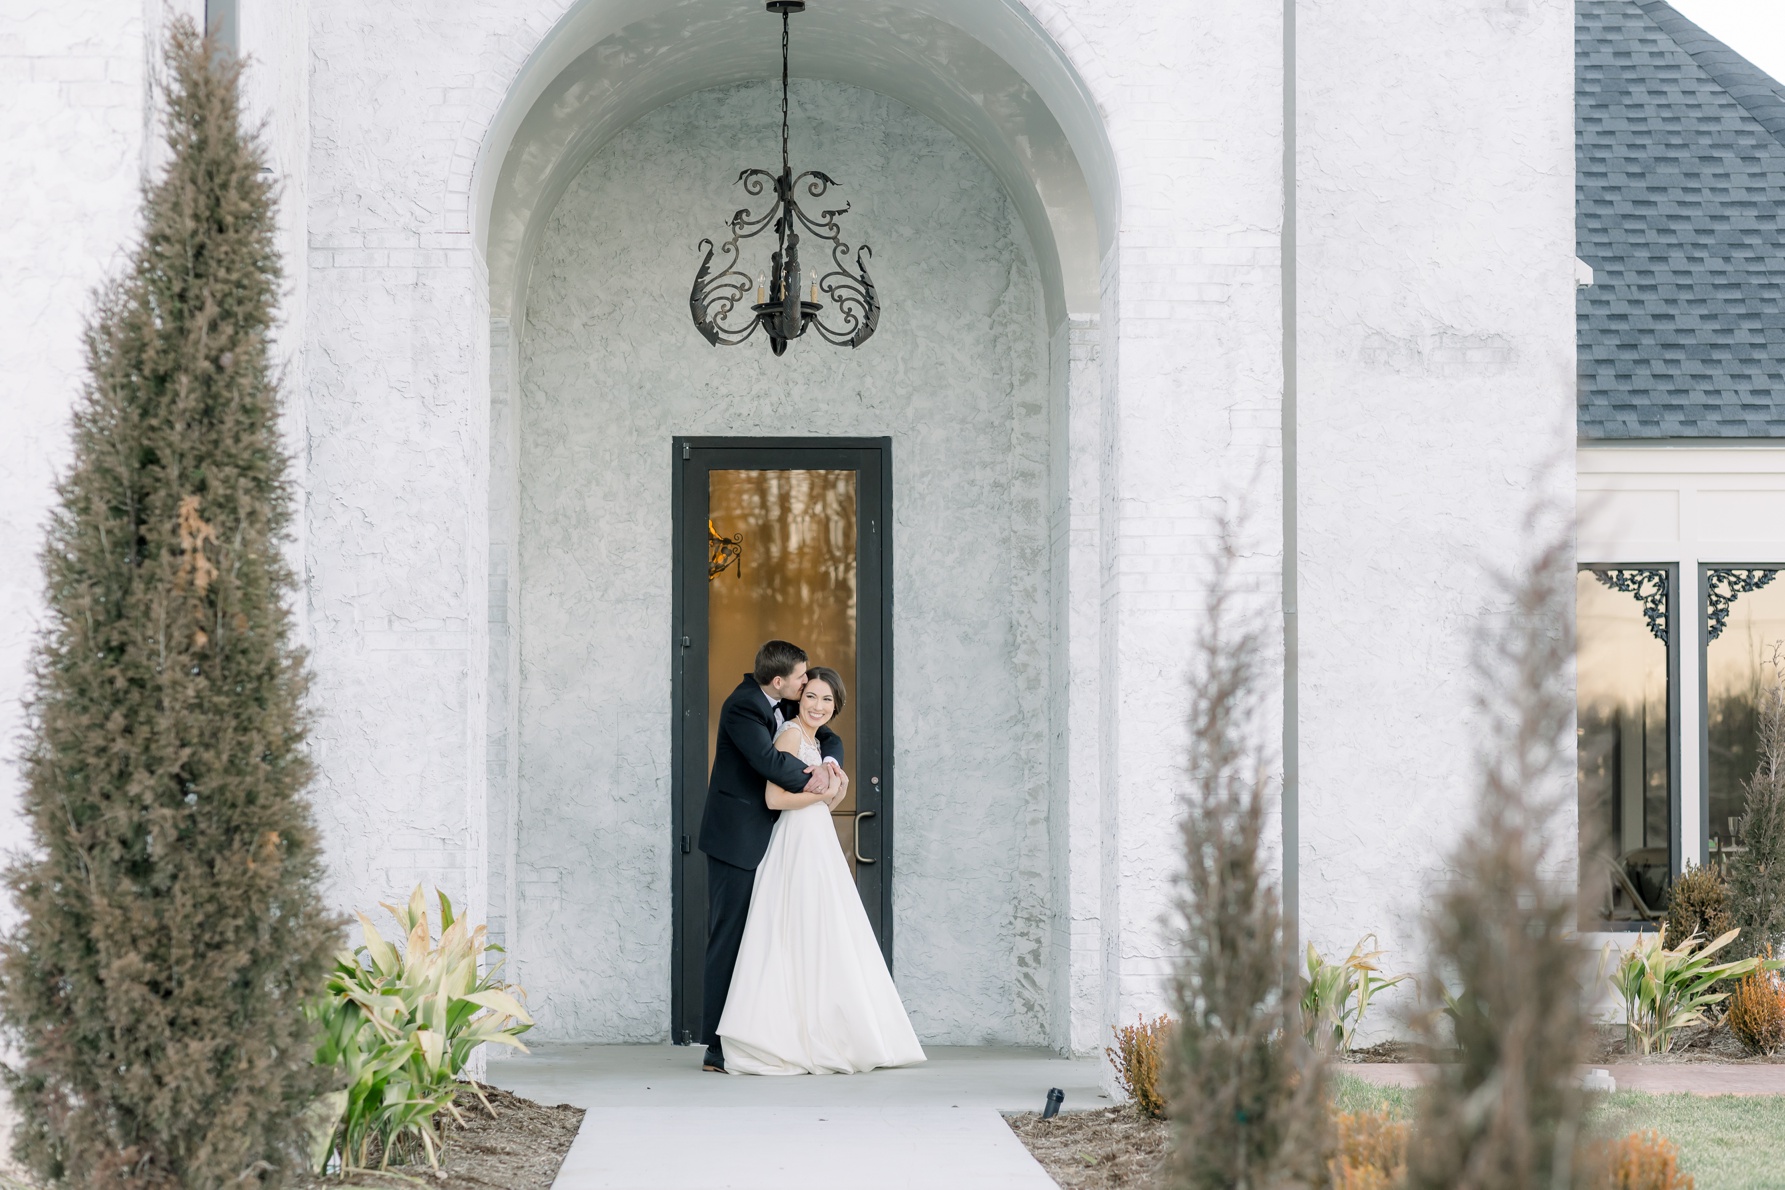 woodlands at five gables chattanooga wedding venue highlight by chattanooga wedding photographer alyssa rachelle photography